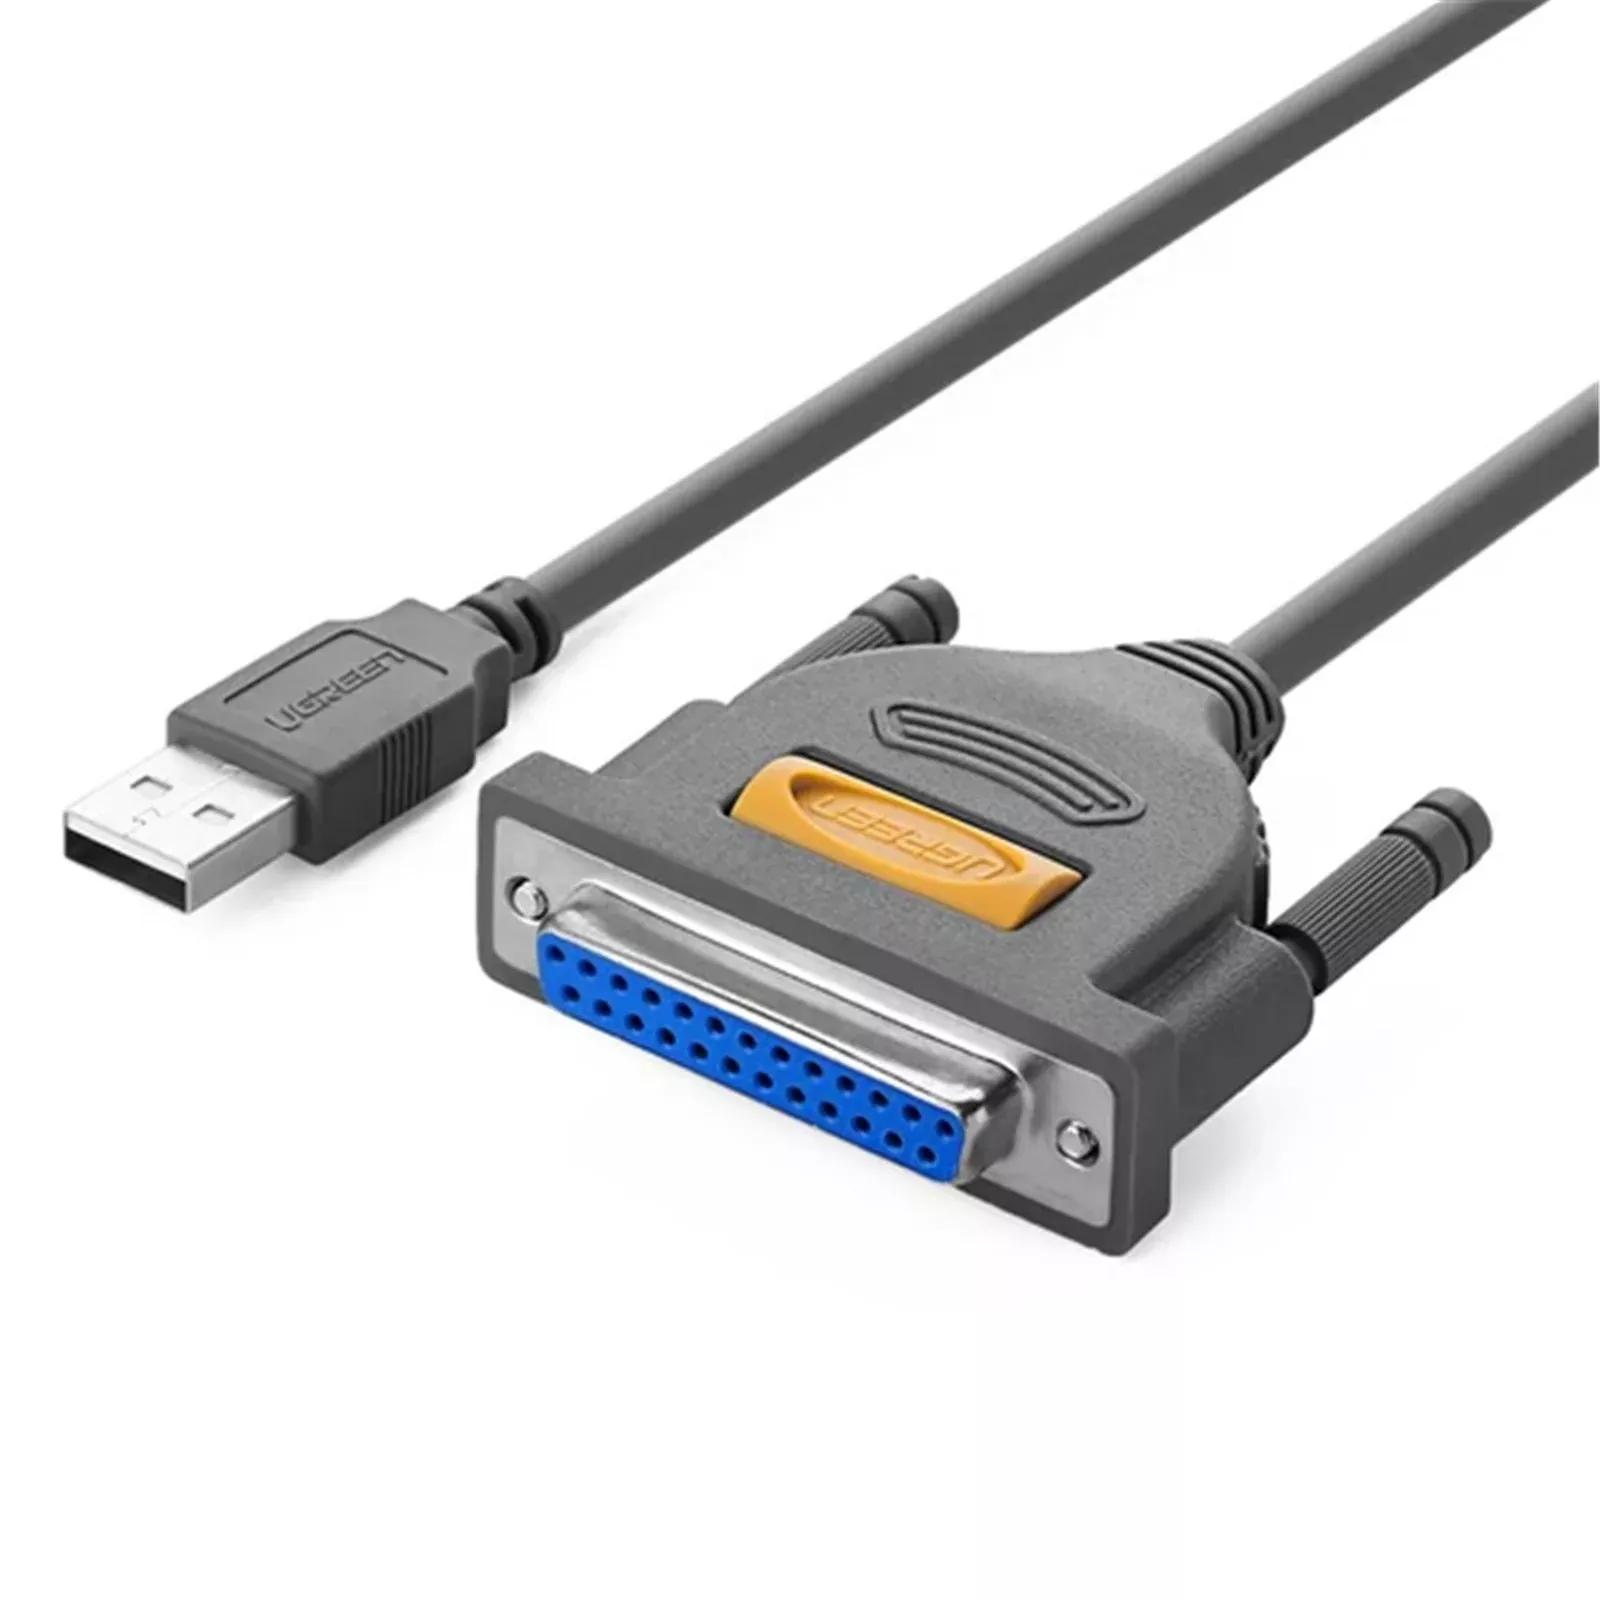 UGREEEN 2 Mtr USB 2.0 A To DB25 Female Parallel Print Cable